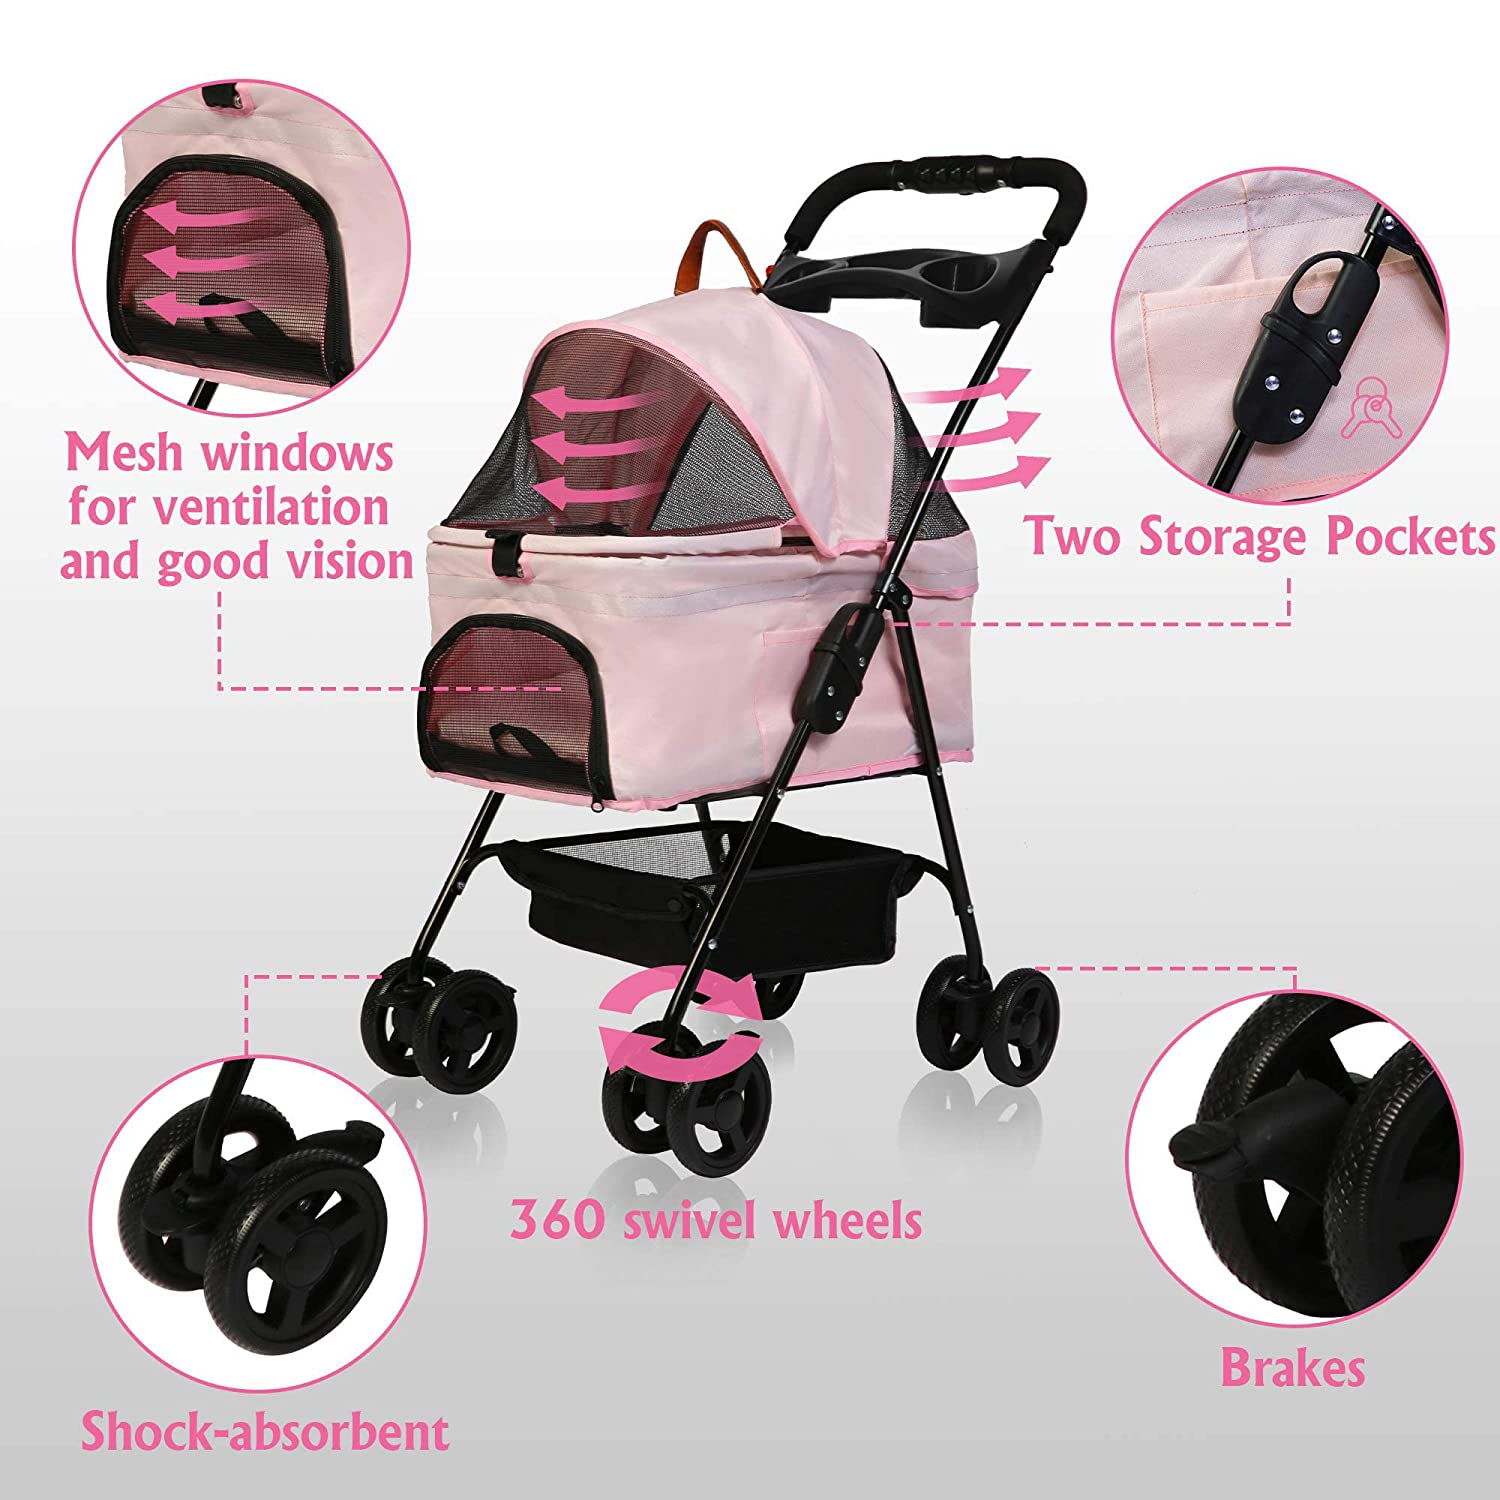 Foldable Pet Stroller with Detachable Carrier & Cup Holder for Small Dog/Cat, Pink